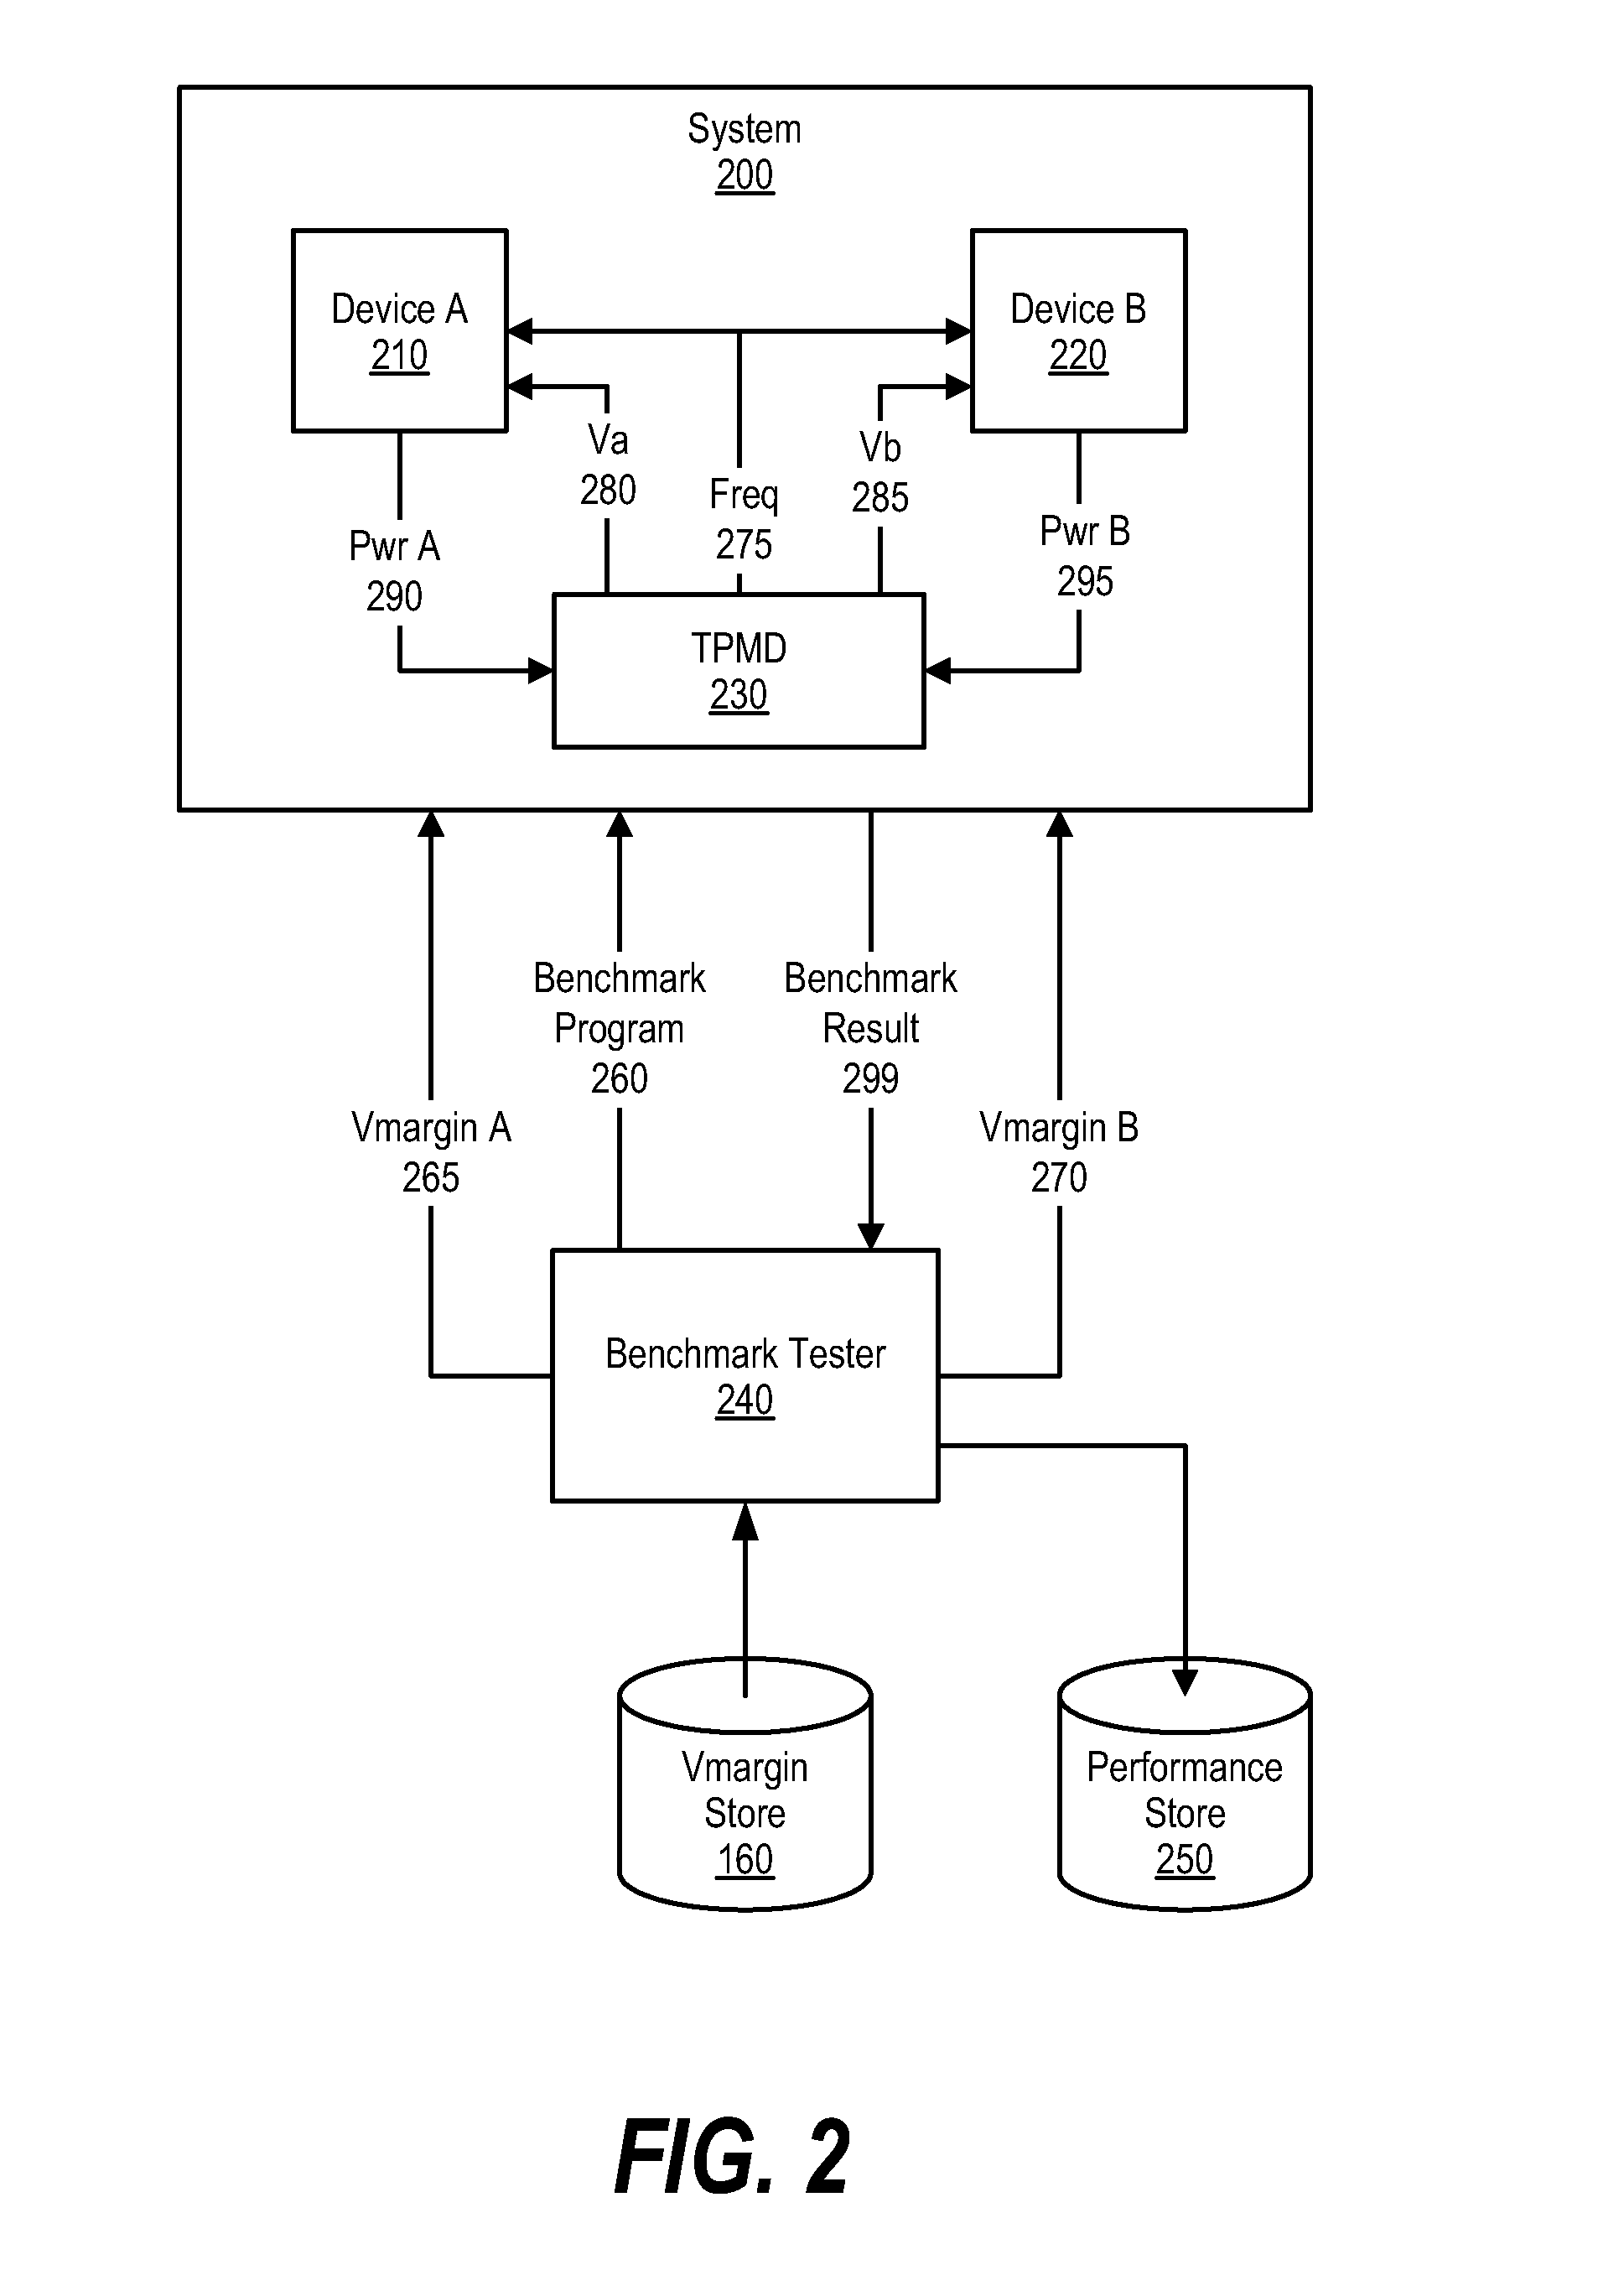 Identifying Deterministic Performance Boost Capability of a Computer System